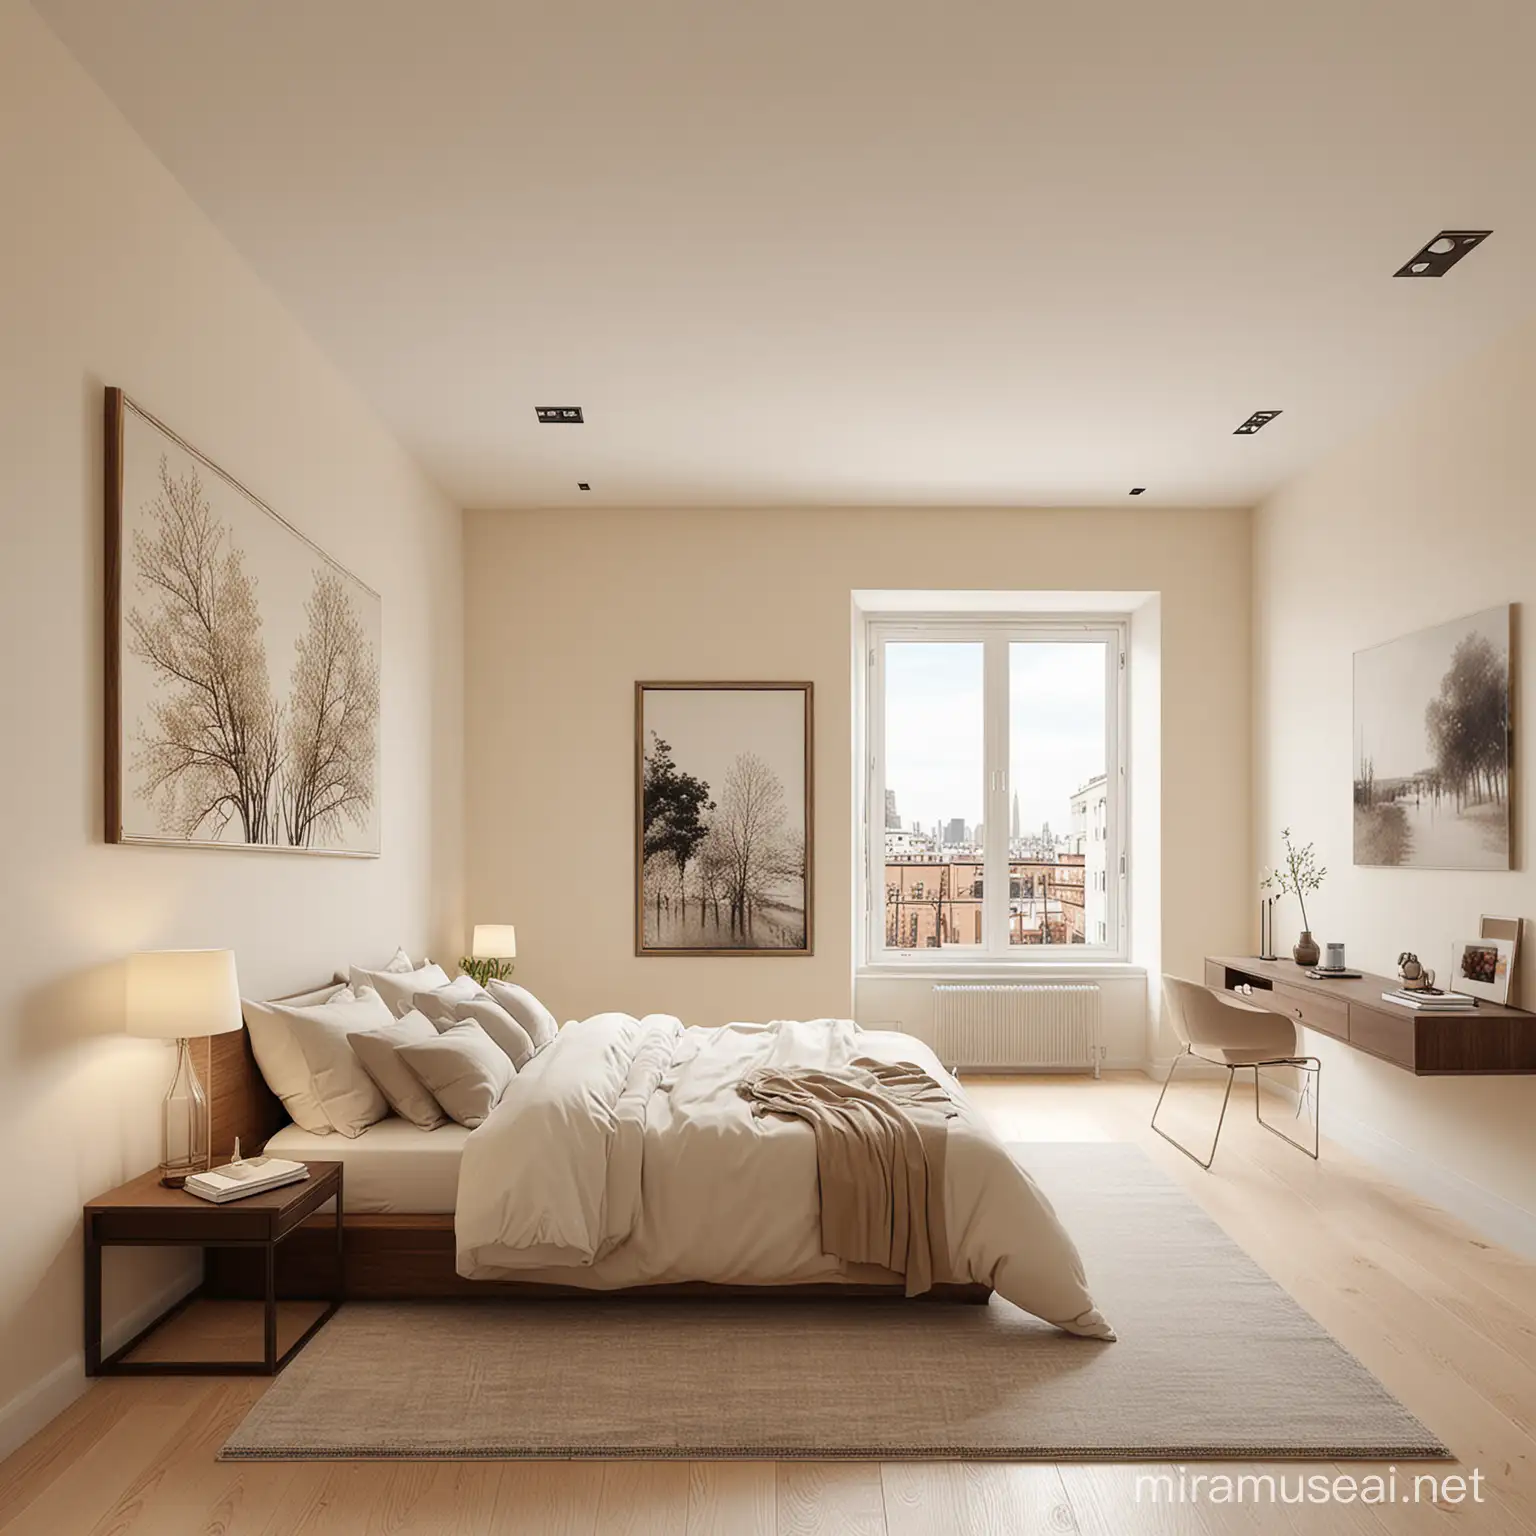 Minimalist Bedroom with Cream Walls and Beautiful Artwork on Second Floor Apartment